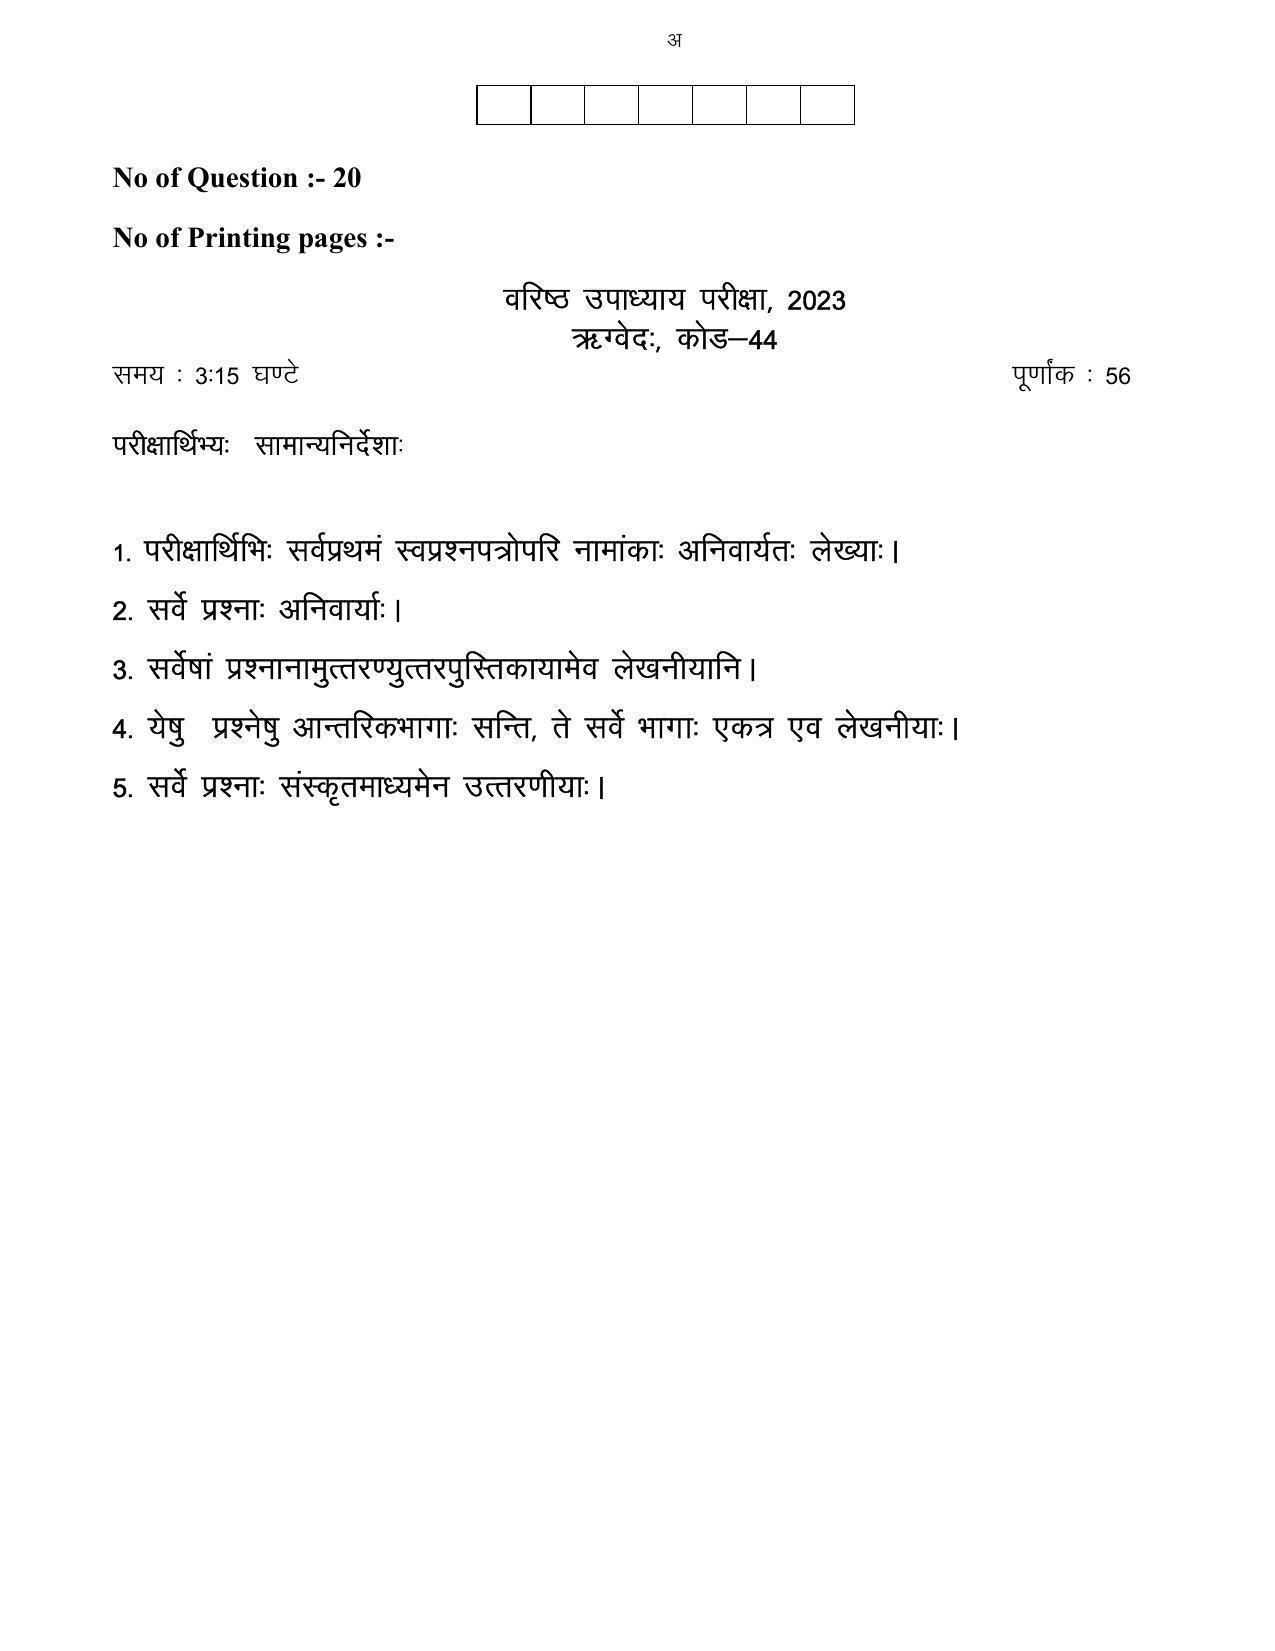 RBSE 2023 CLASS 12 RIGVED Paper - Page 5